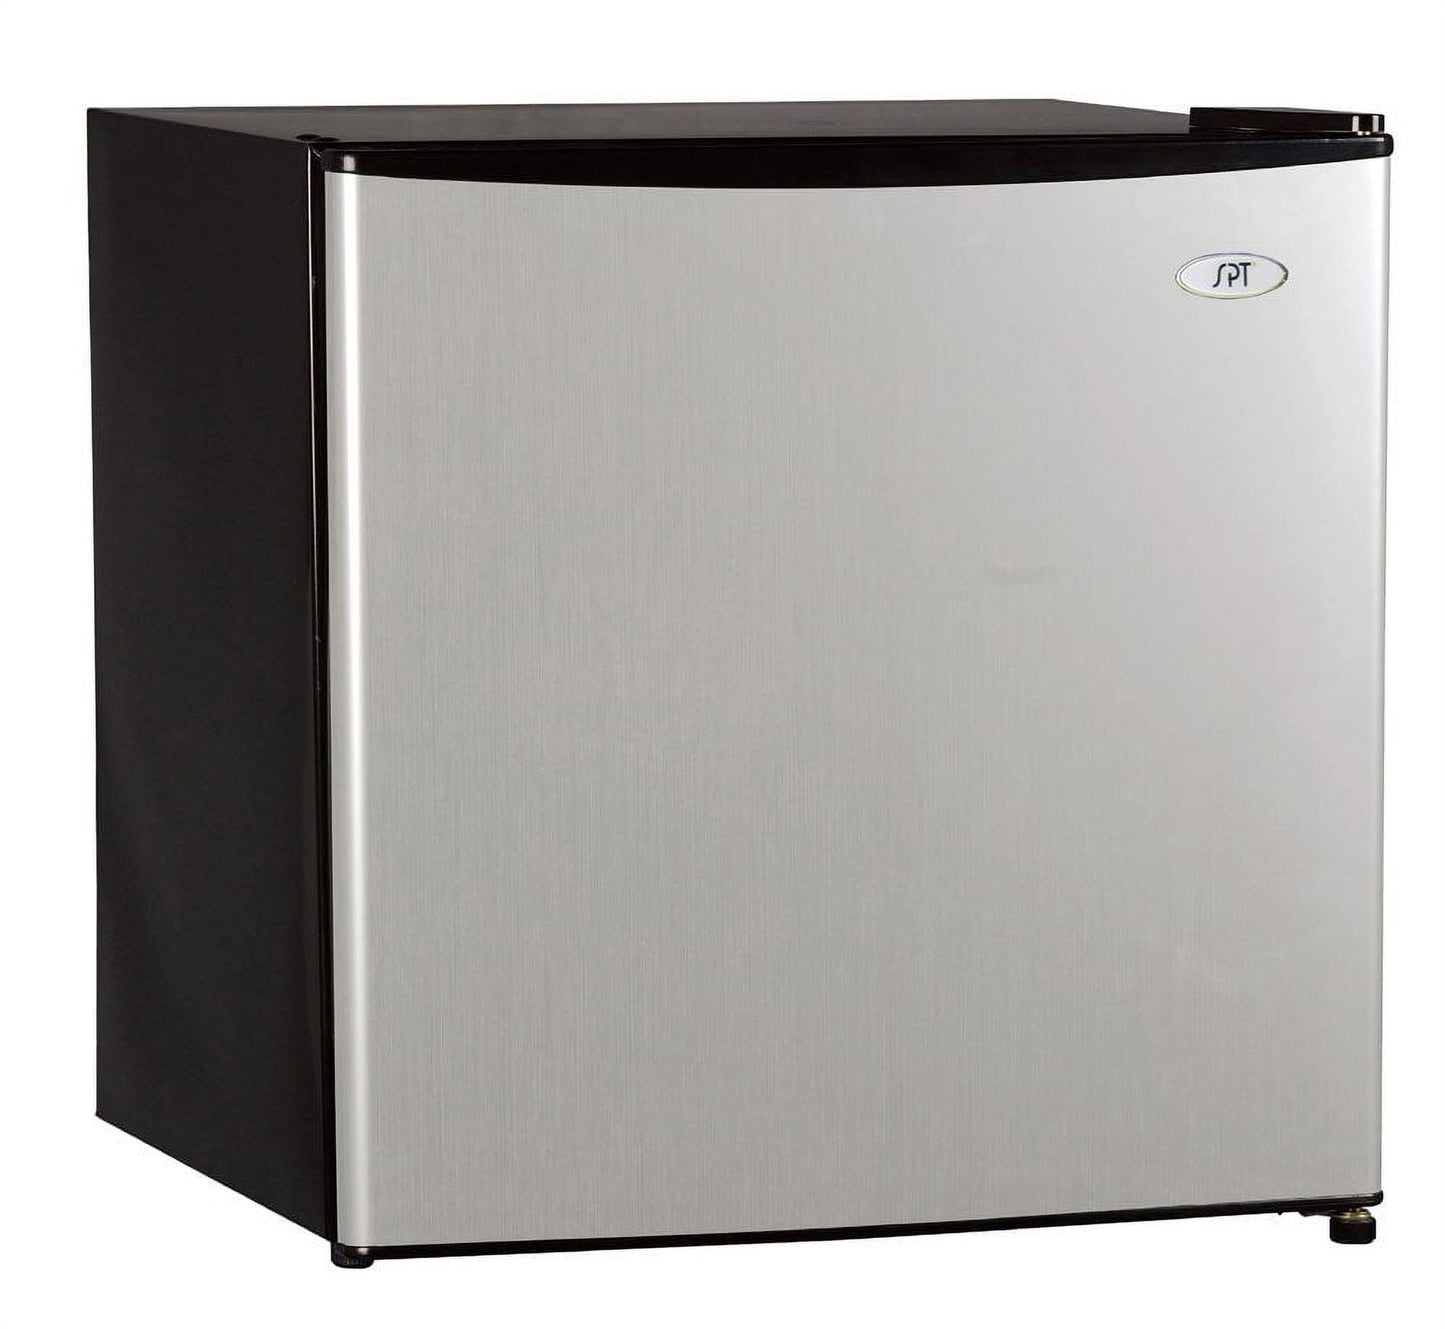 1.6 cu.ft. Compace Refrigerator with Energy Star - Stainless Steel